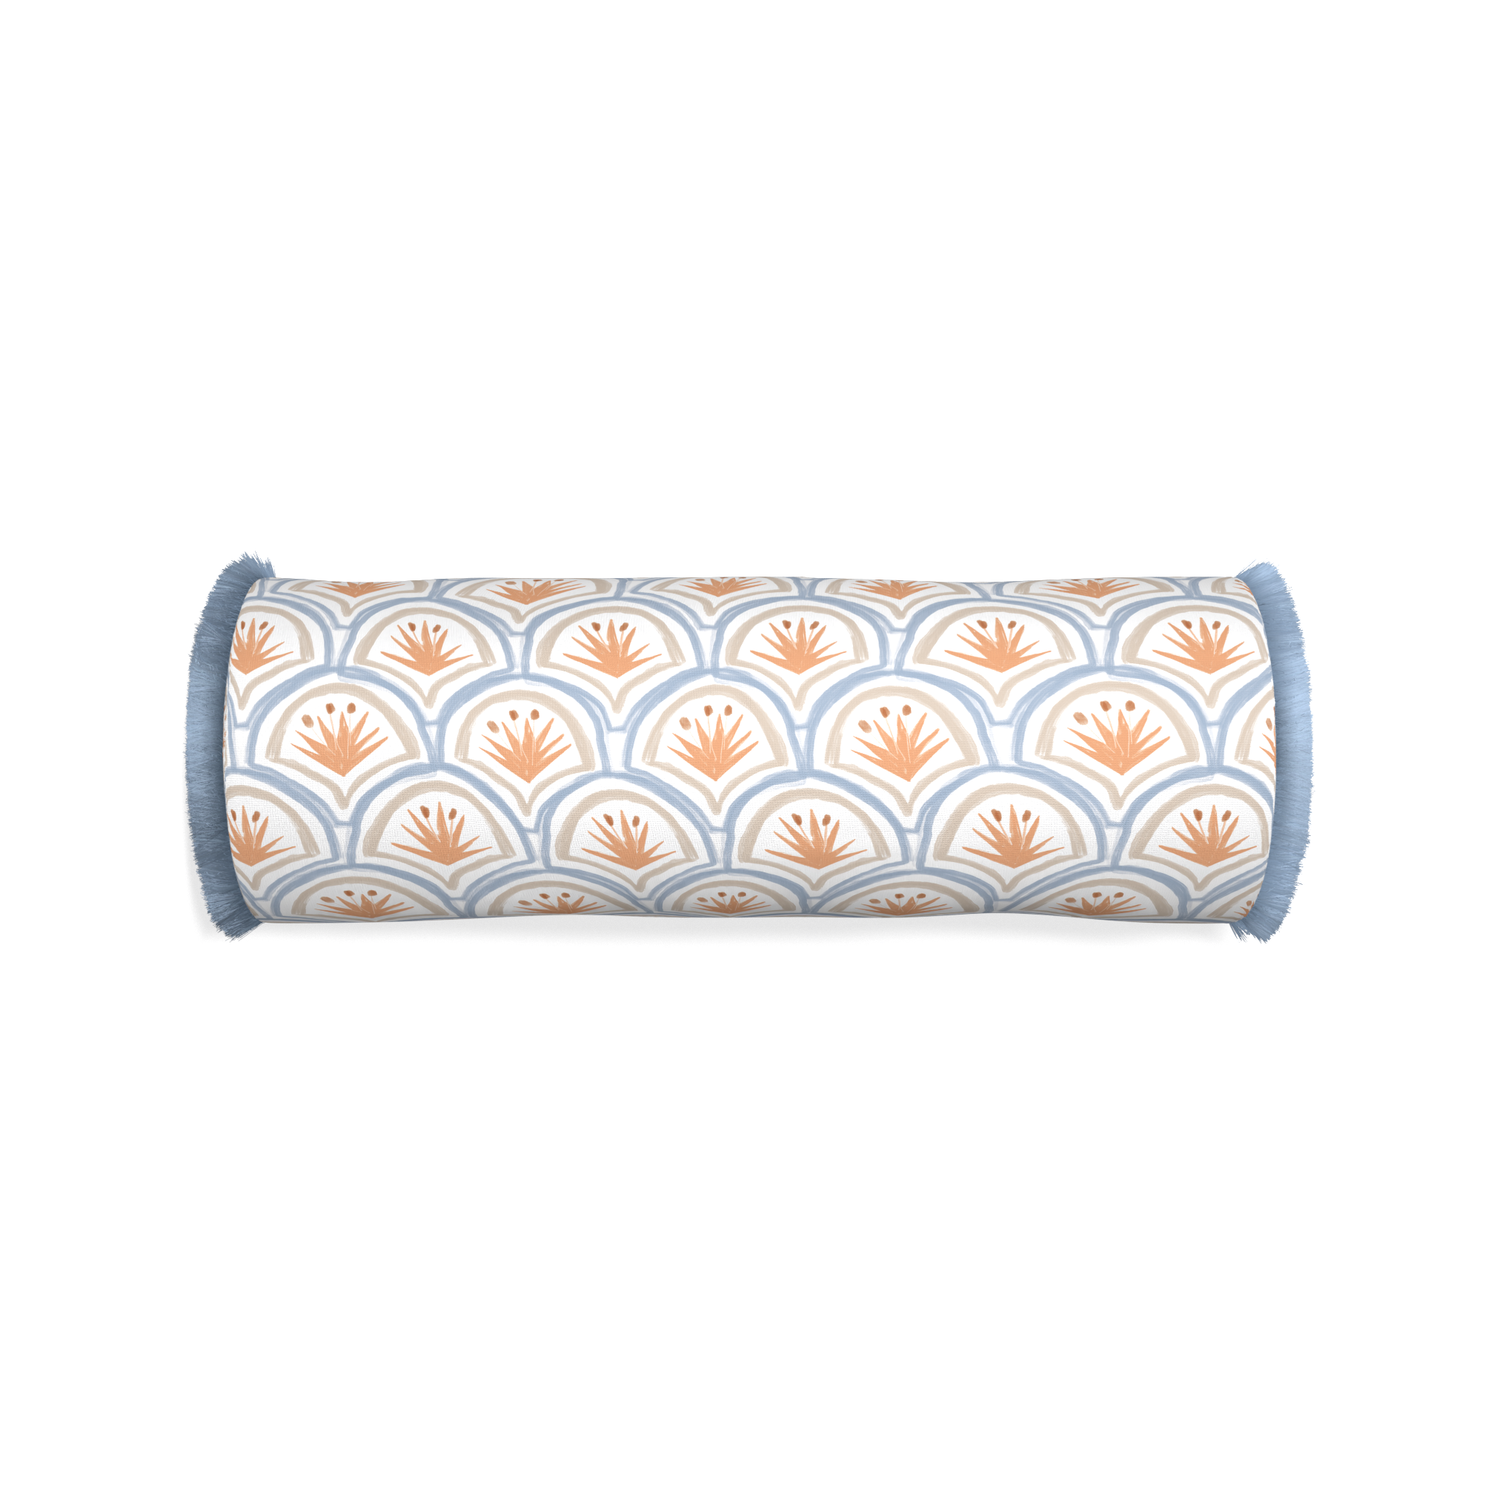 Bolster thatcher apricot custom pillow with sky fringe on white background